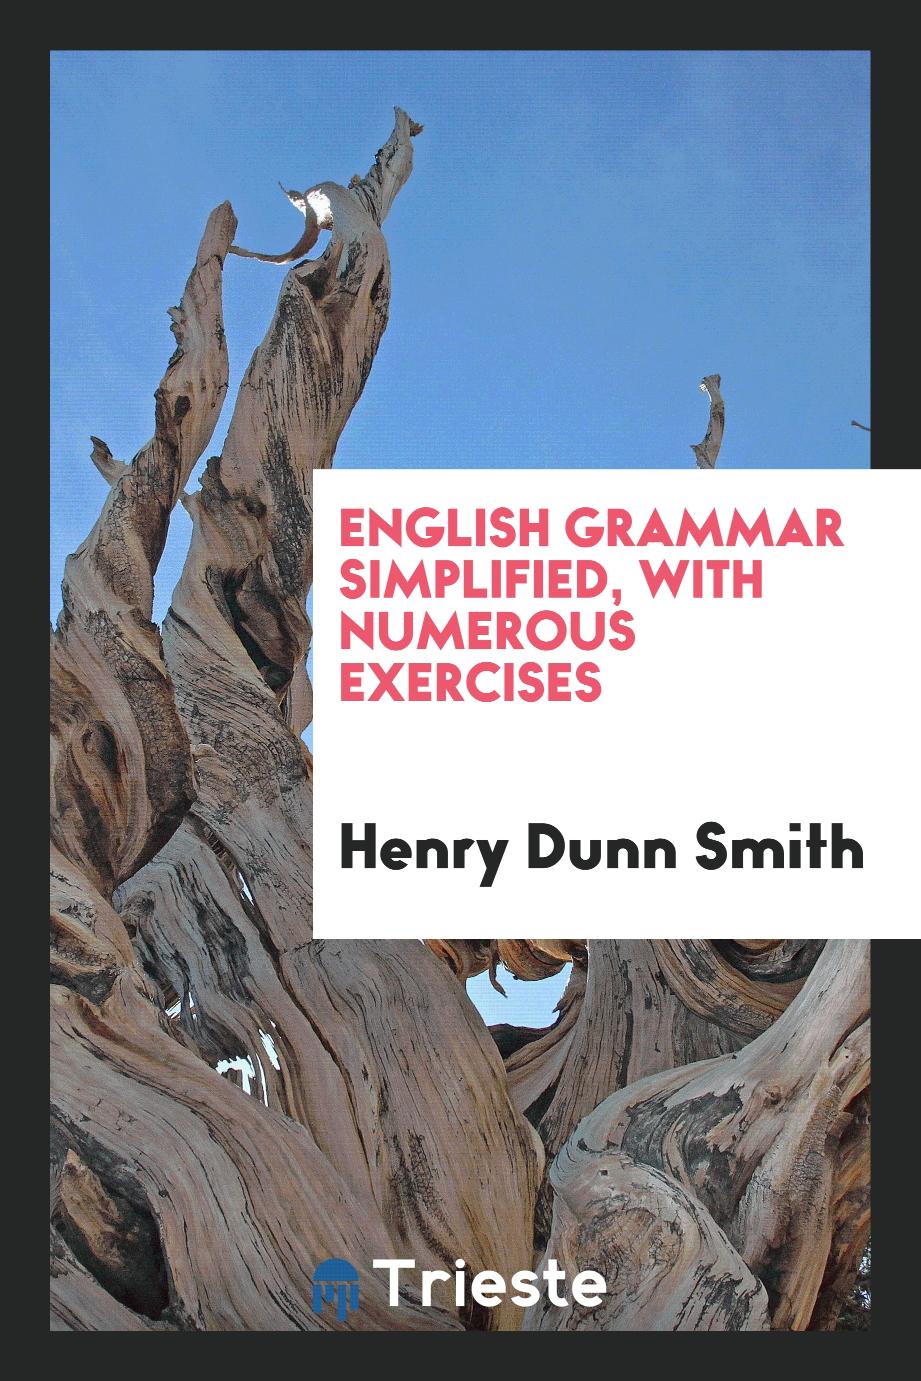 English Grammar Simplified, with Numerous Exercises